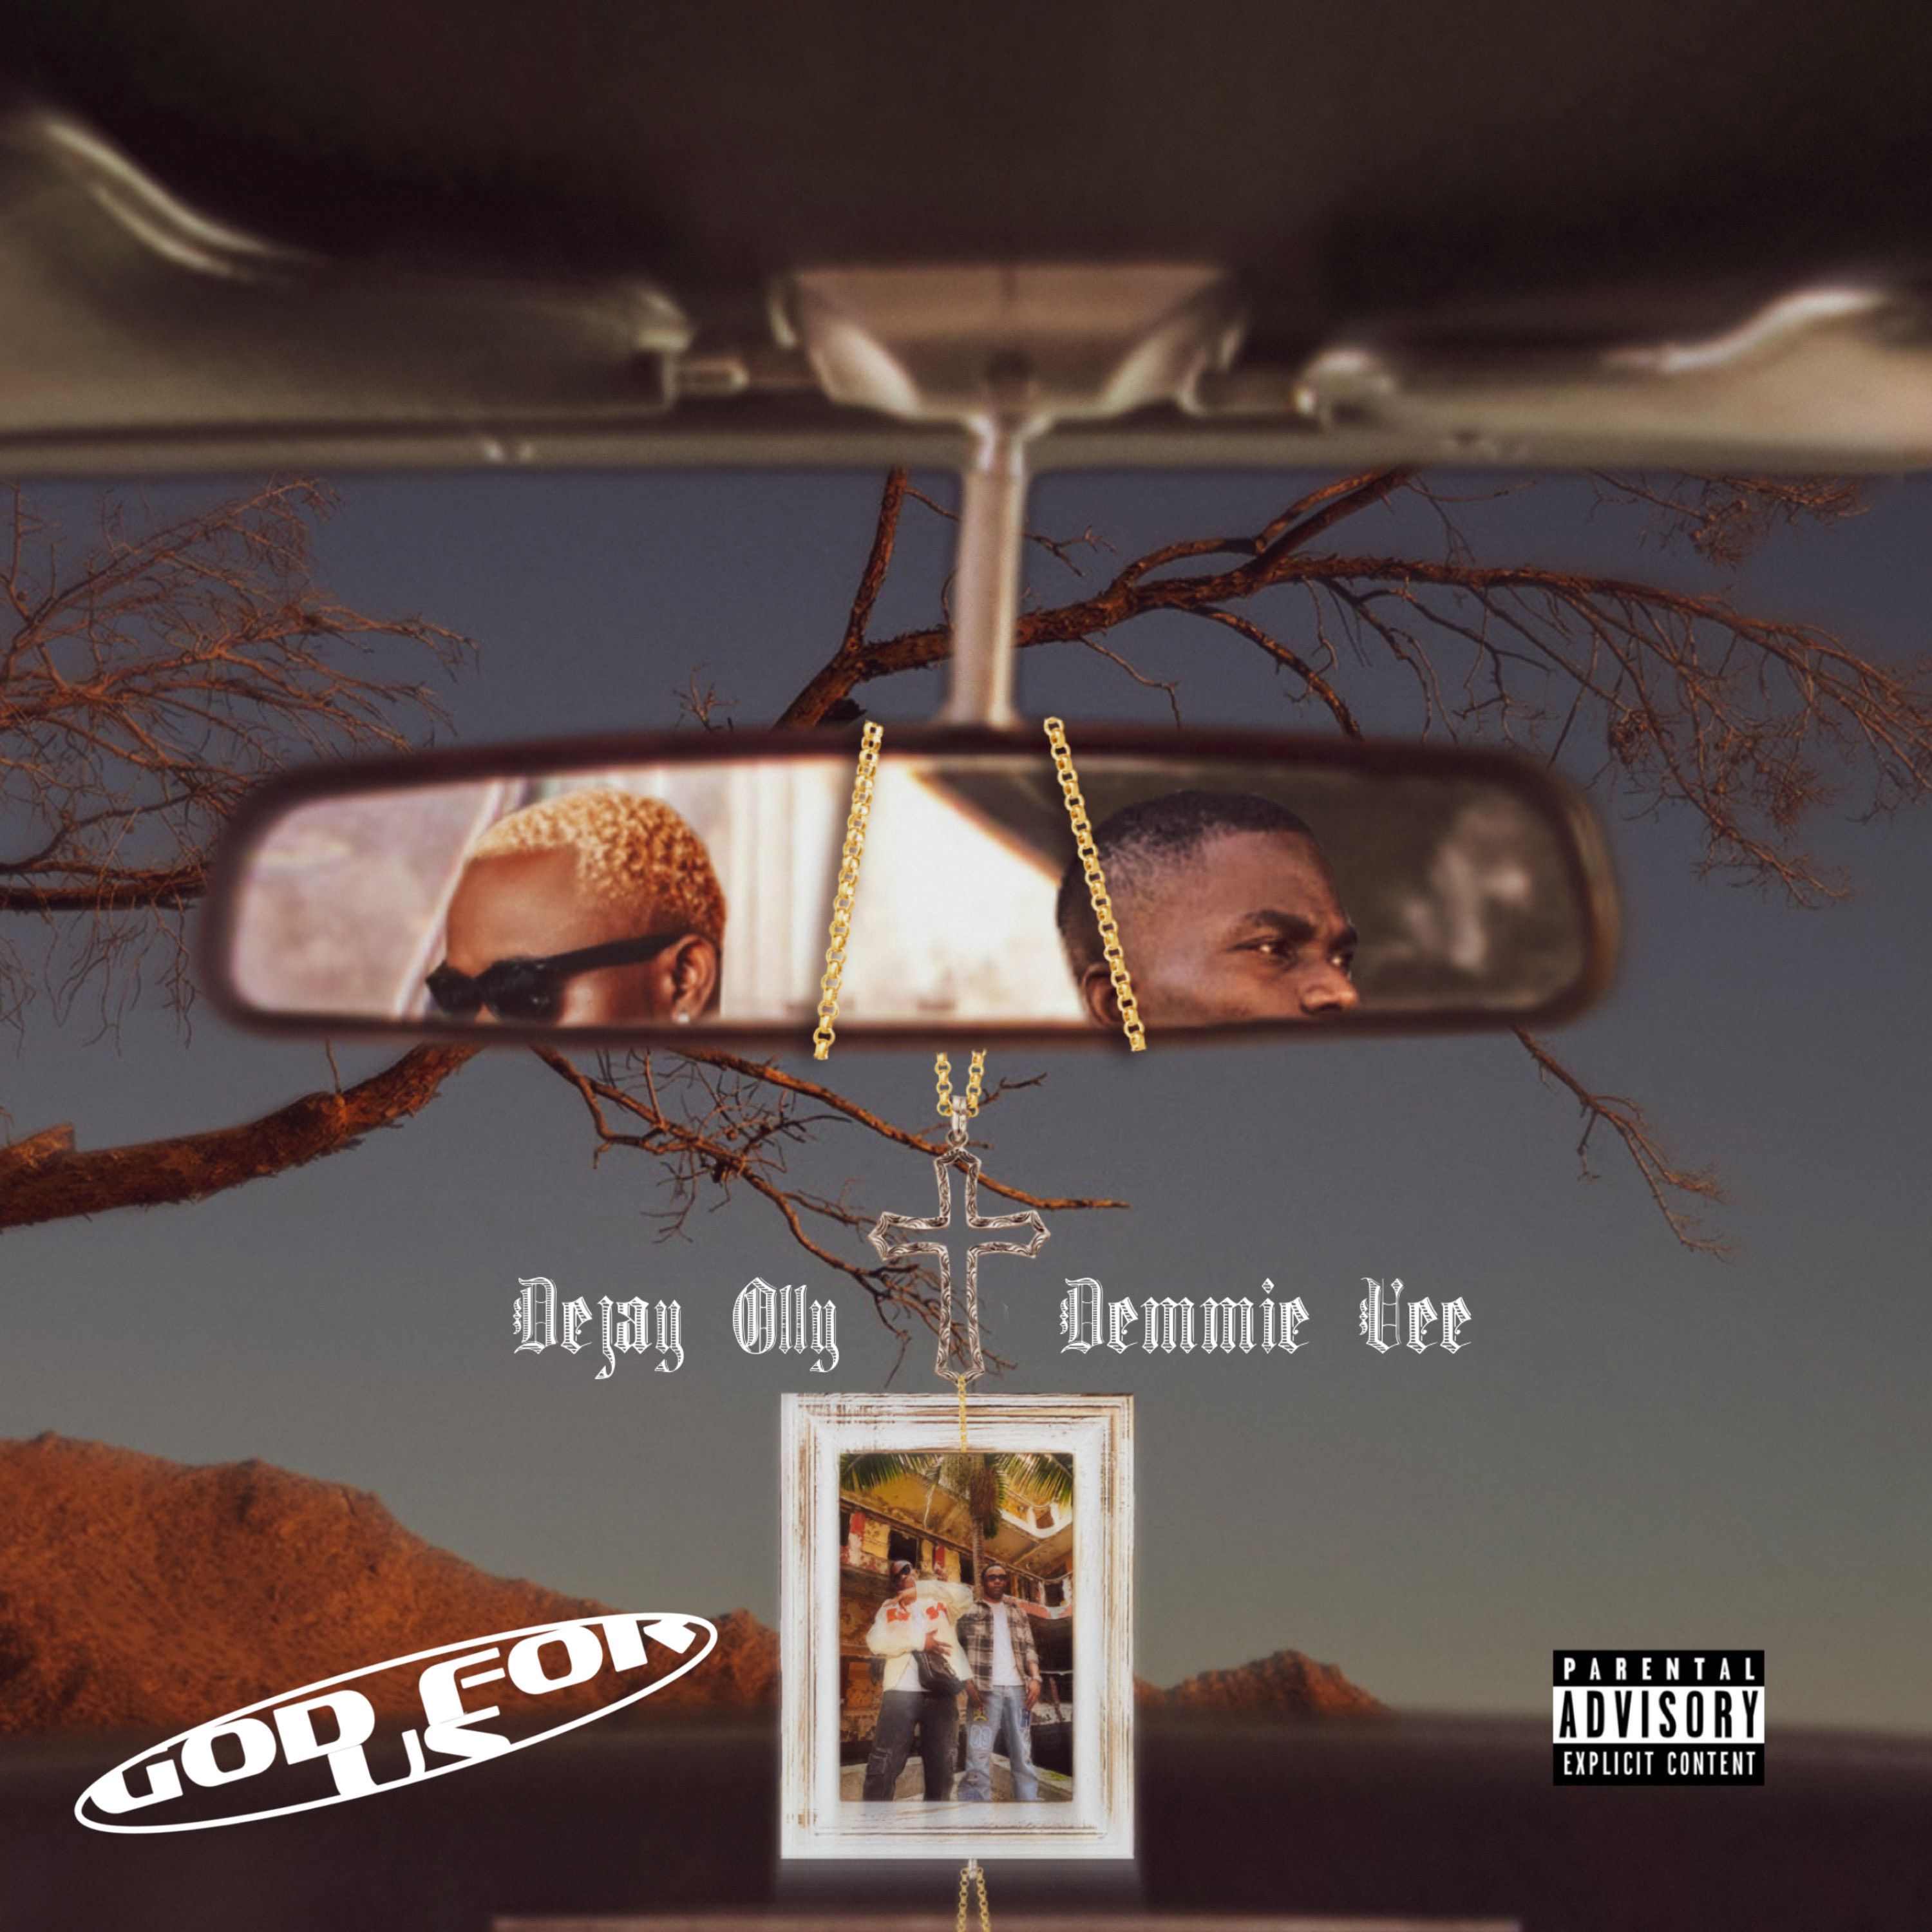 Dejay Olly - GOD FOR US Ft. Demmiee Vee